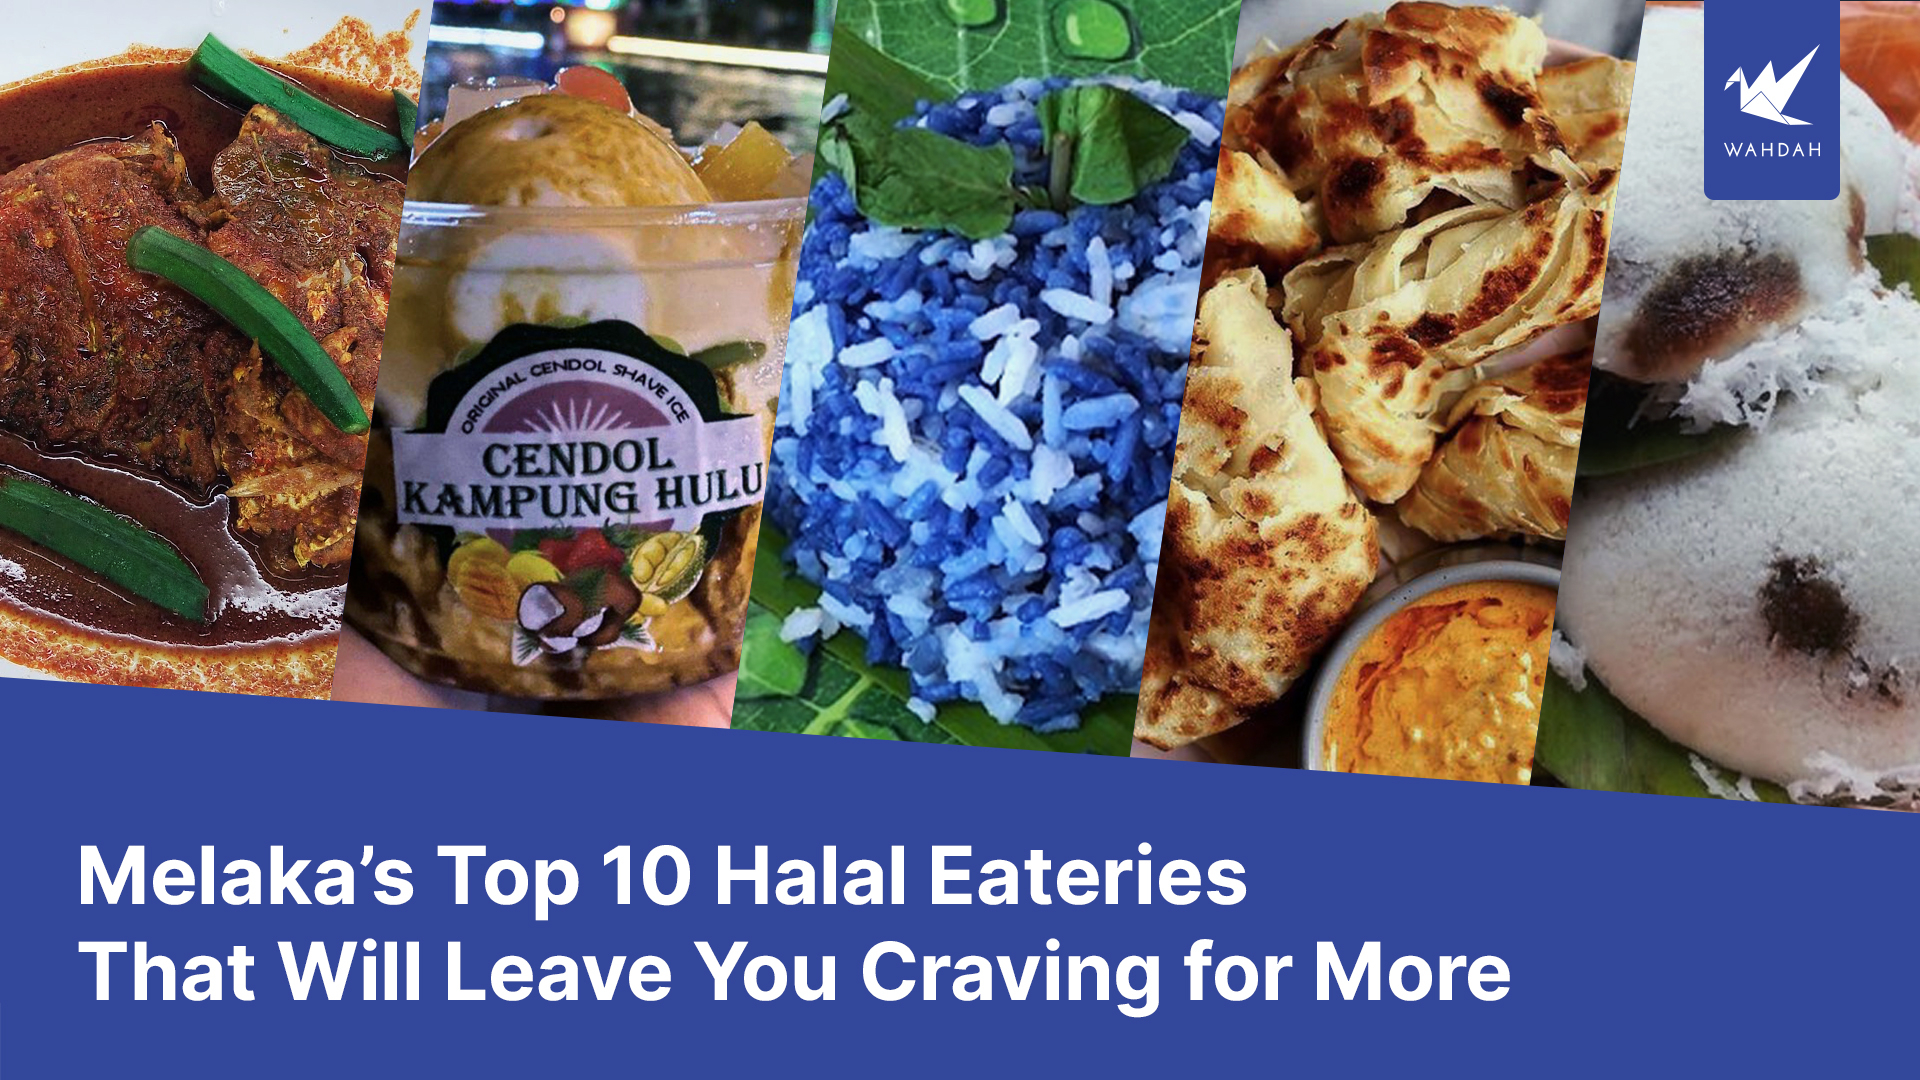 Melaka’s Top 10 Halal Eateries That Will Leave You Craving for More